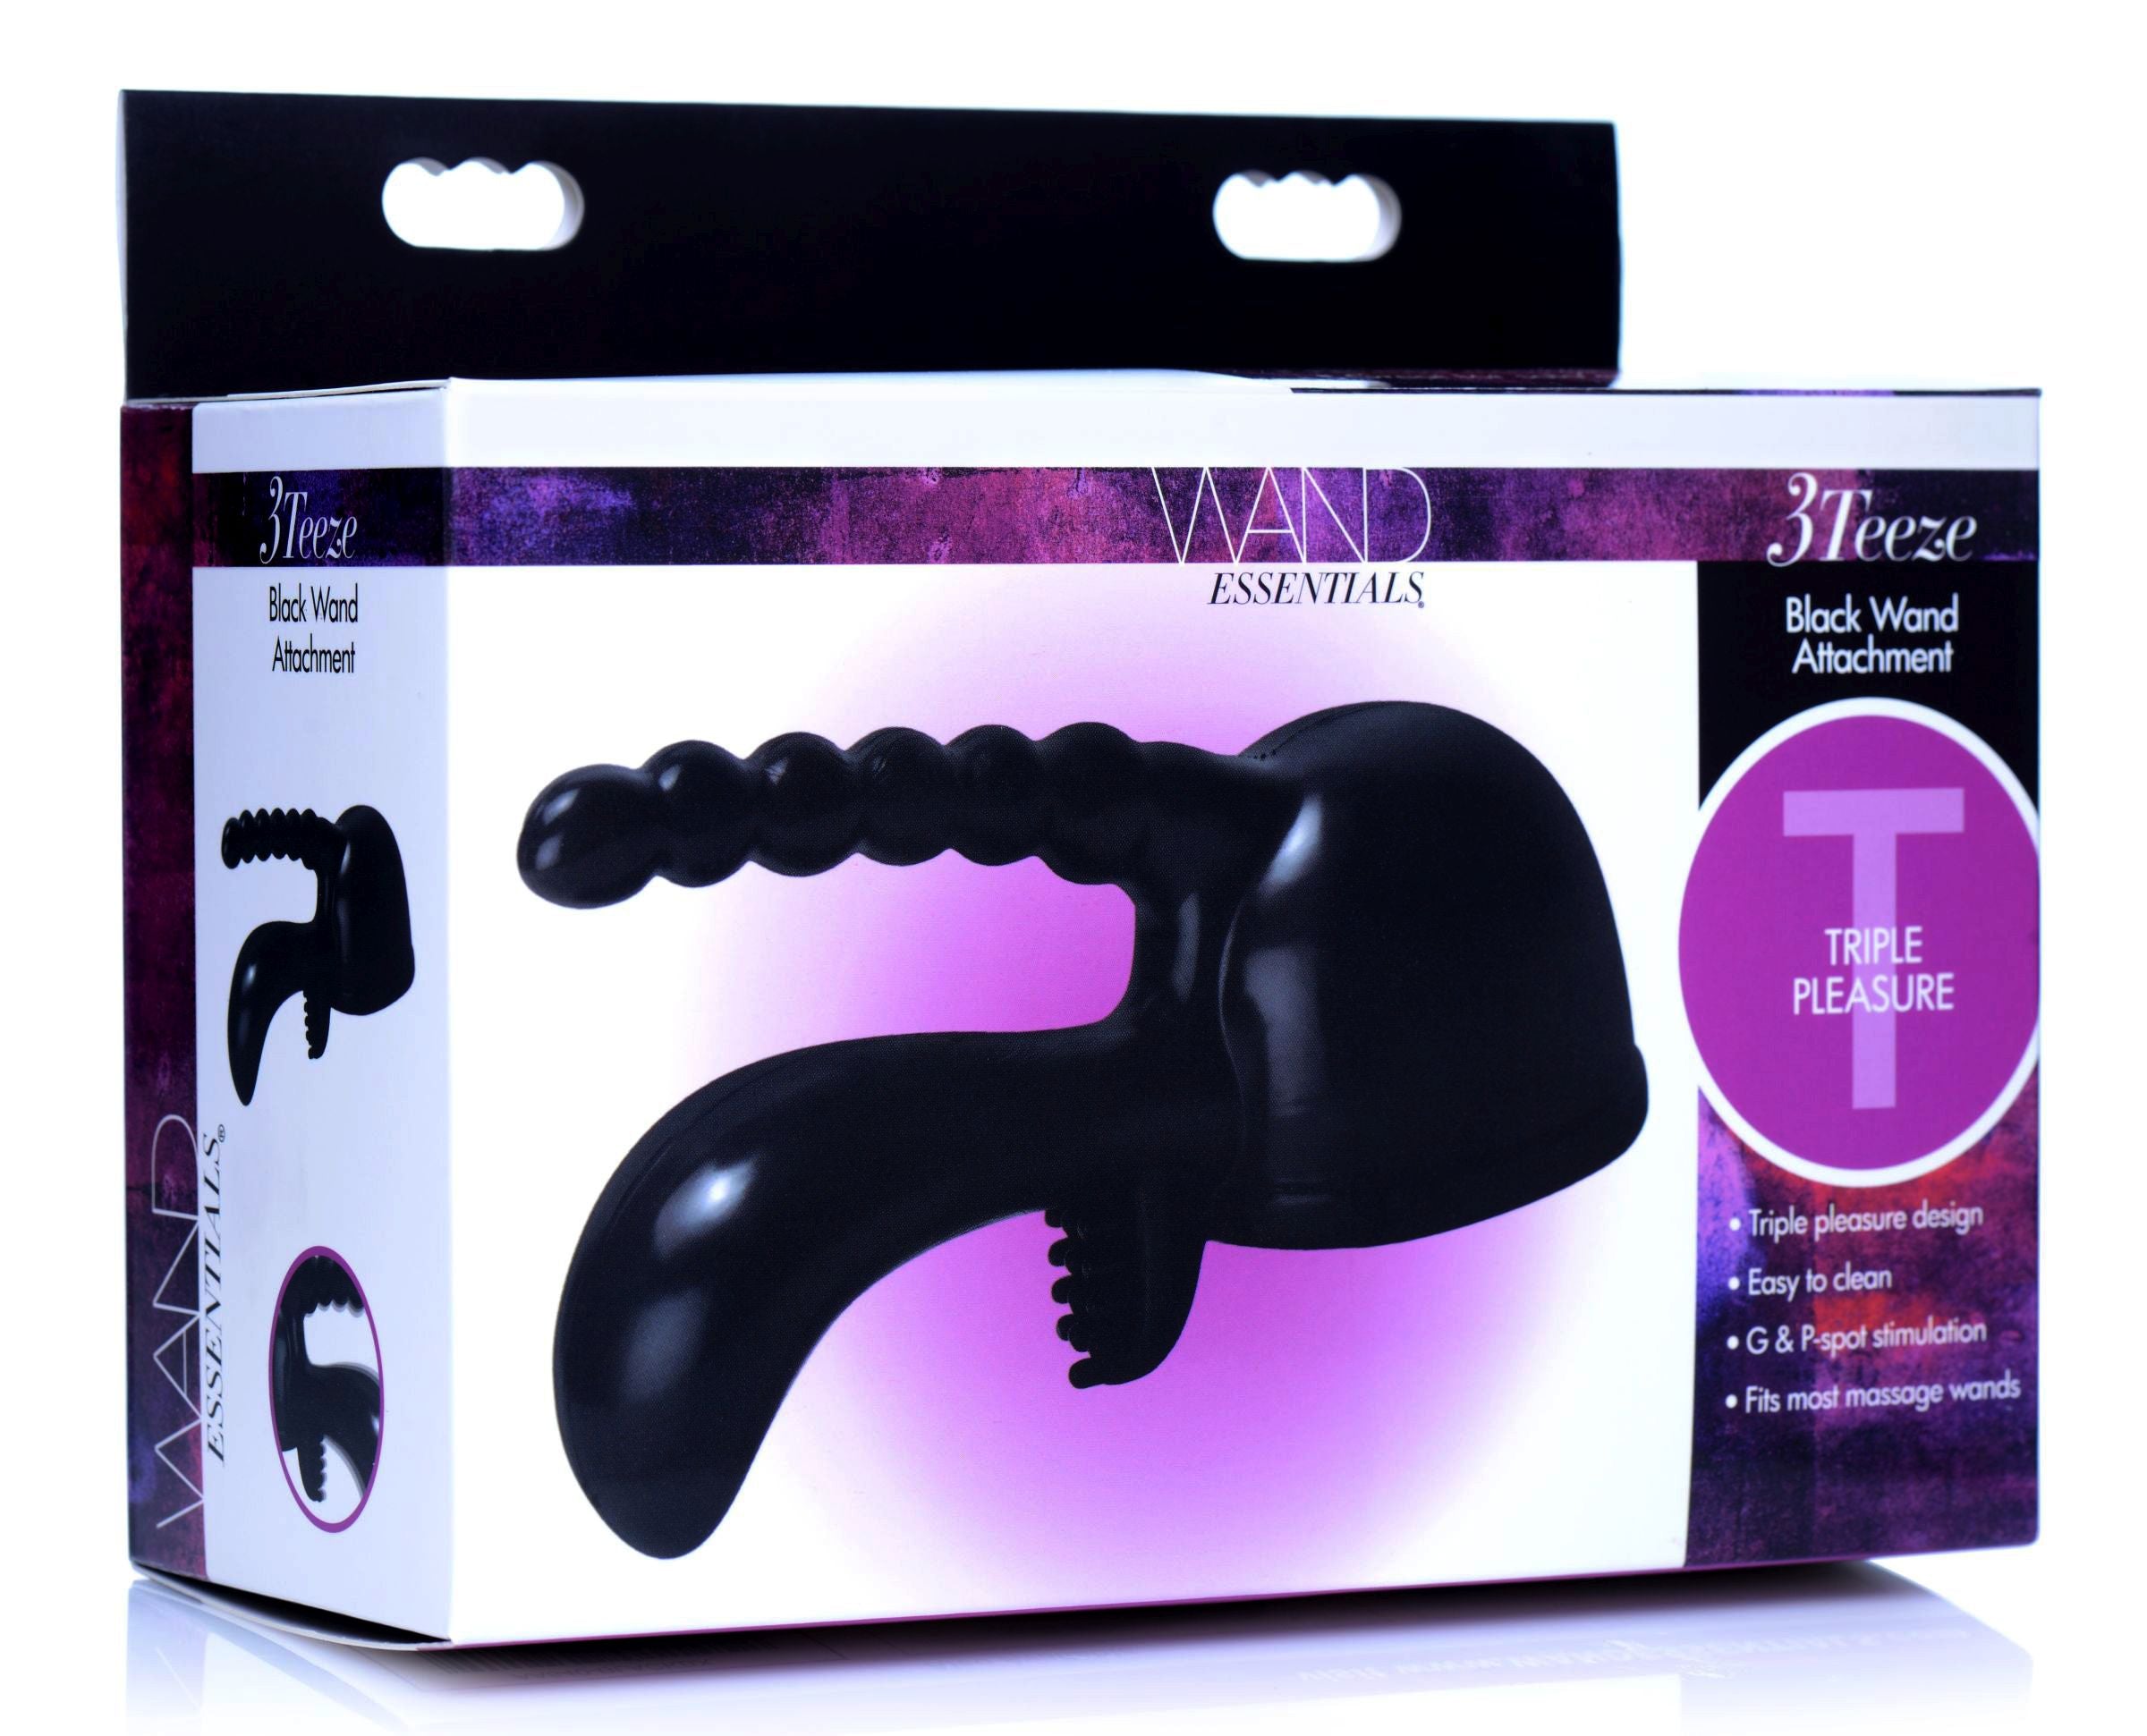 Wand Essentials 3Teez Attachment Boxed